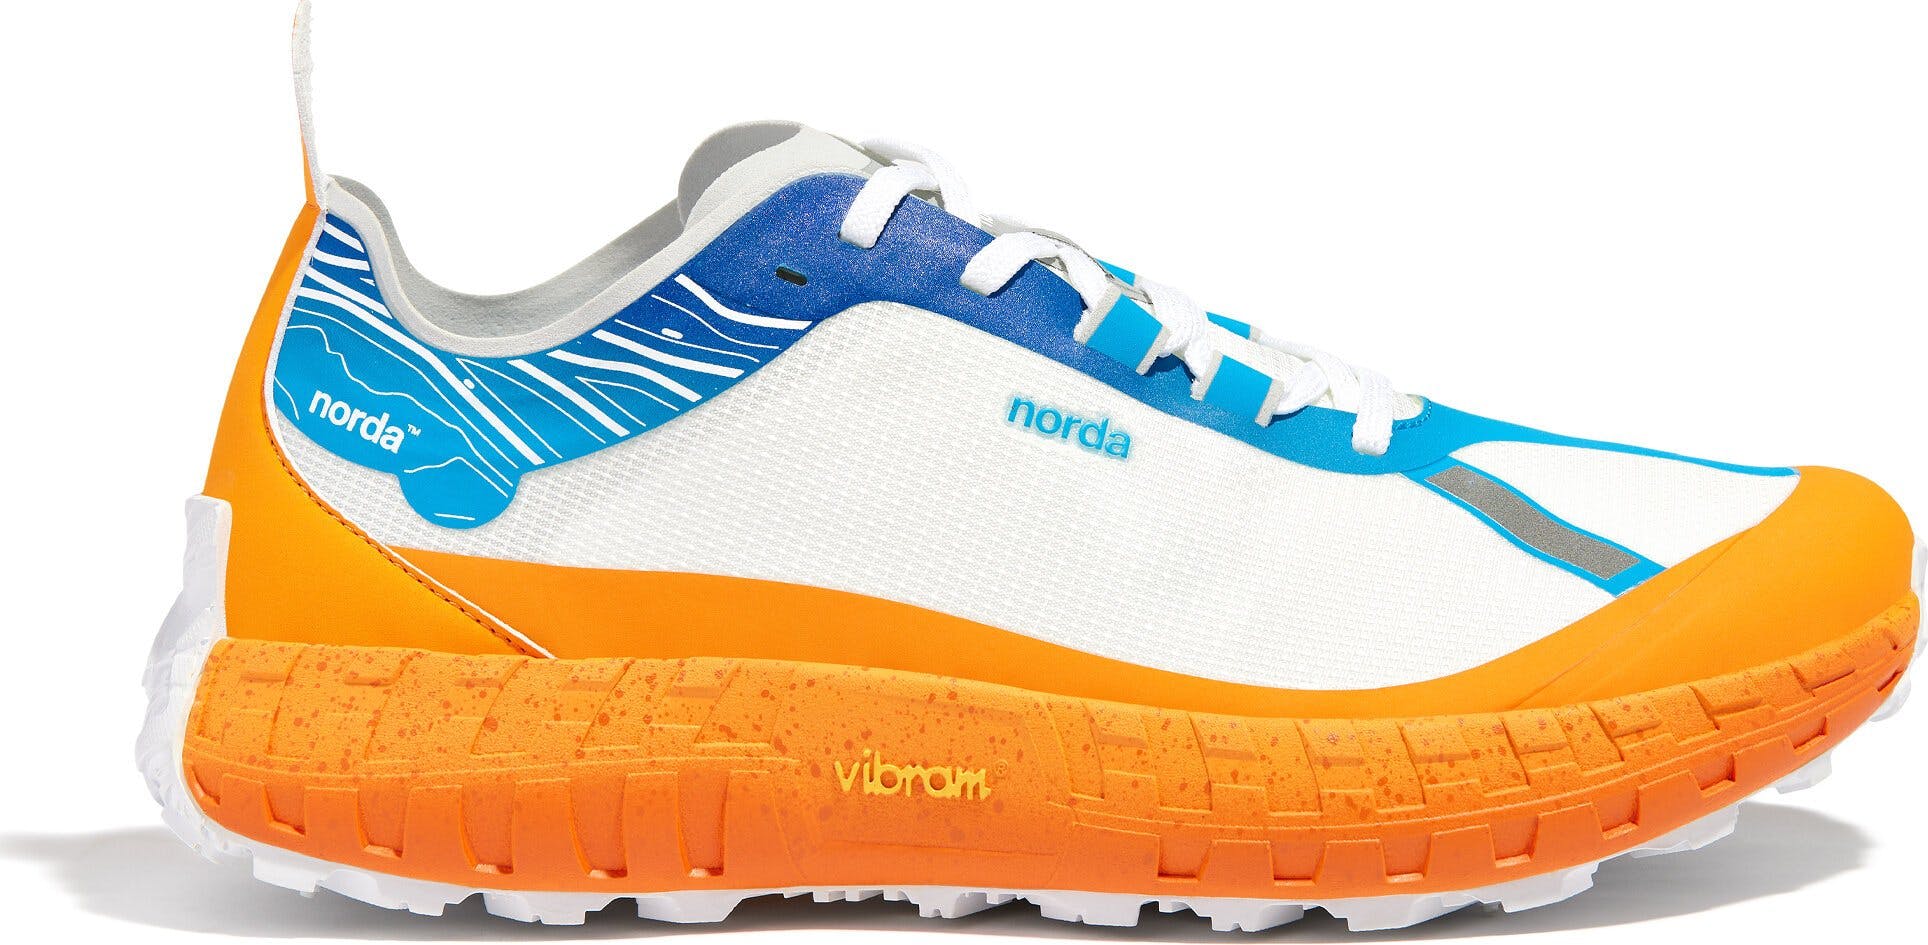 Product image for norda 001 x Ray Zahab Seamless Trail Running Shoes - Unisex